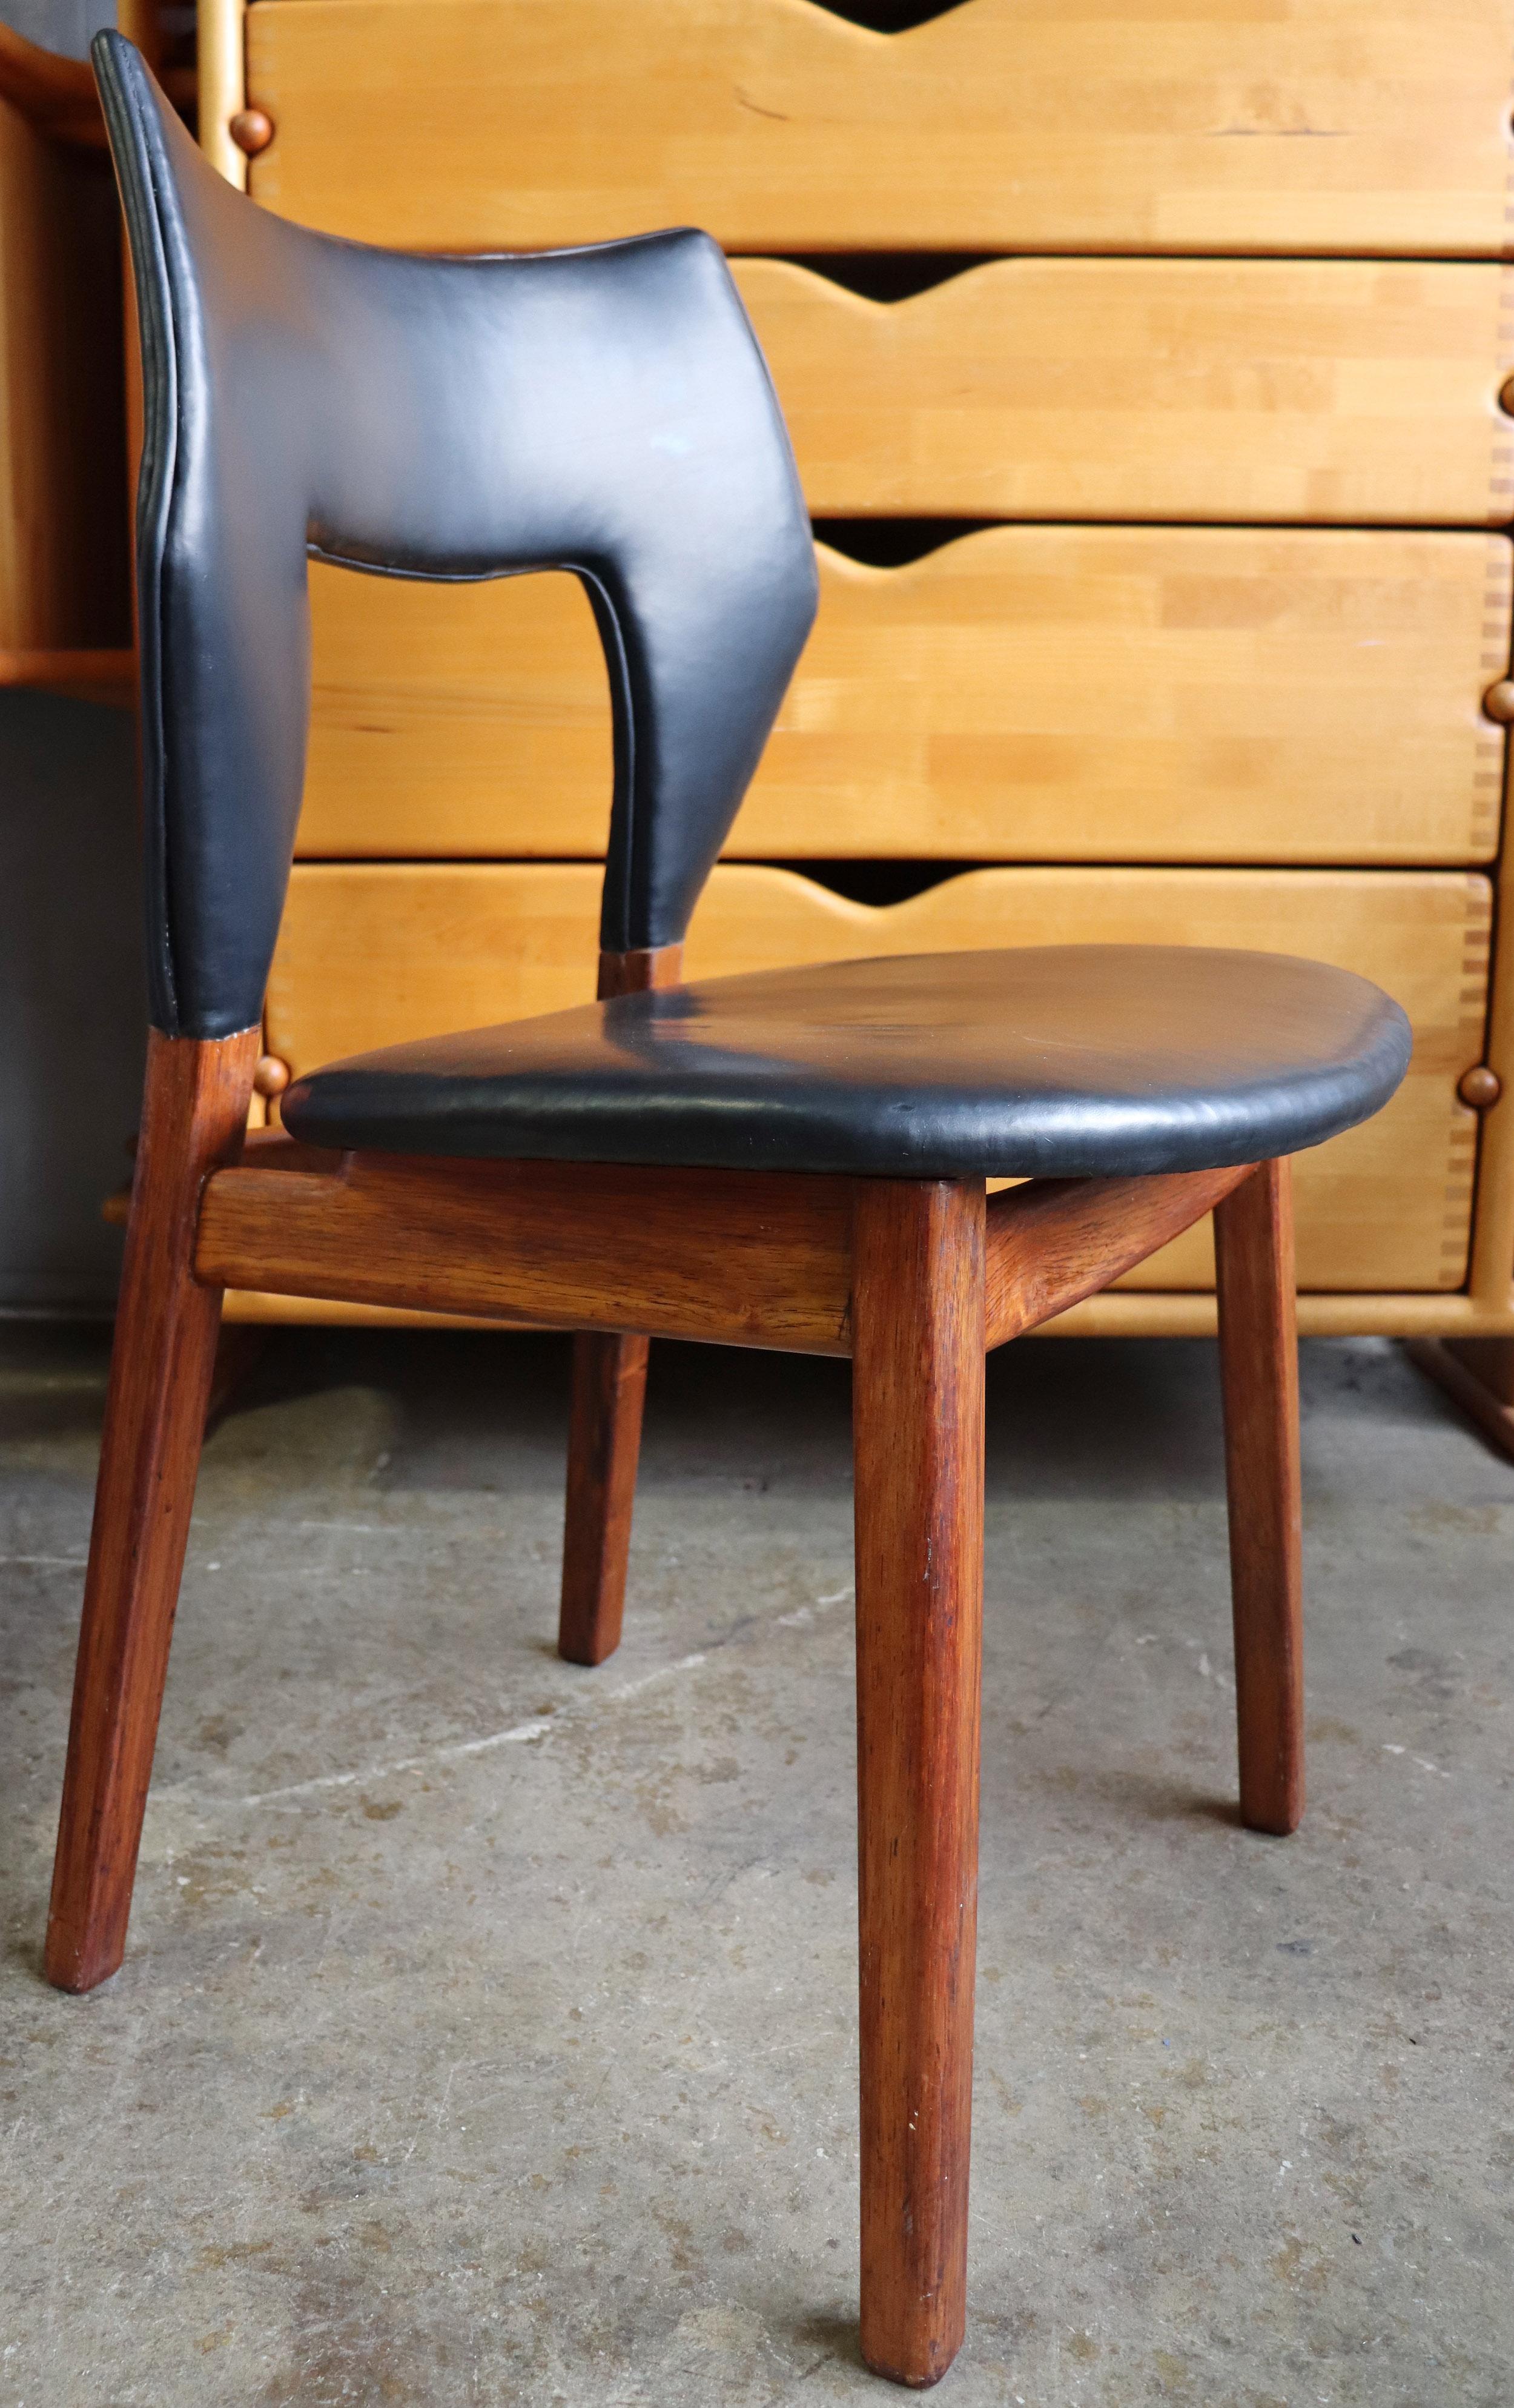 Leather Tove & Edvard Kindt-Larsen Rosewood Chair for Thorald Madsens